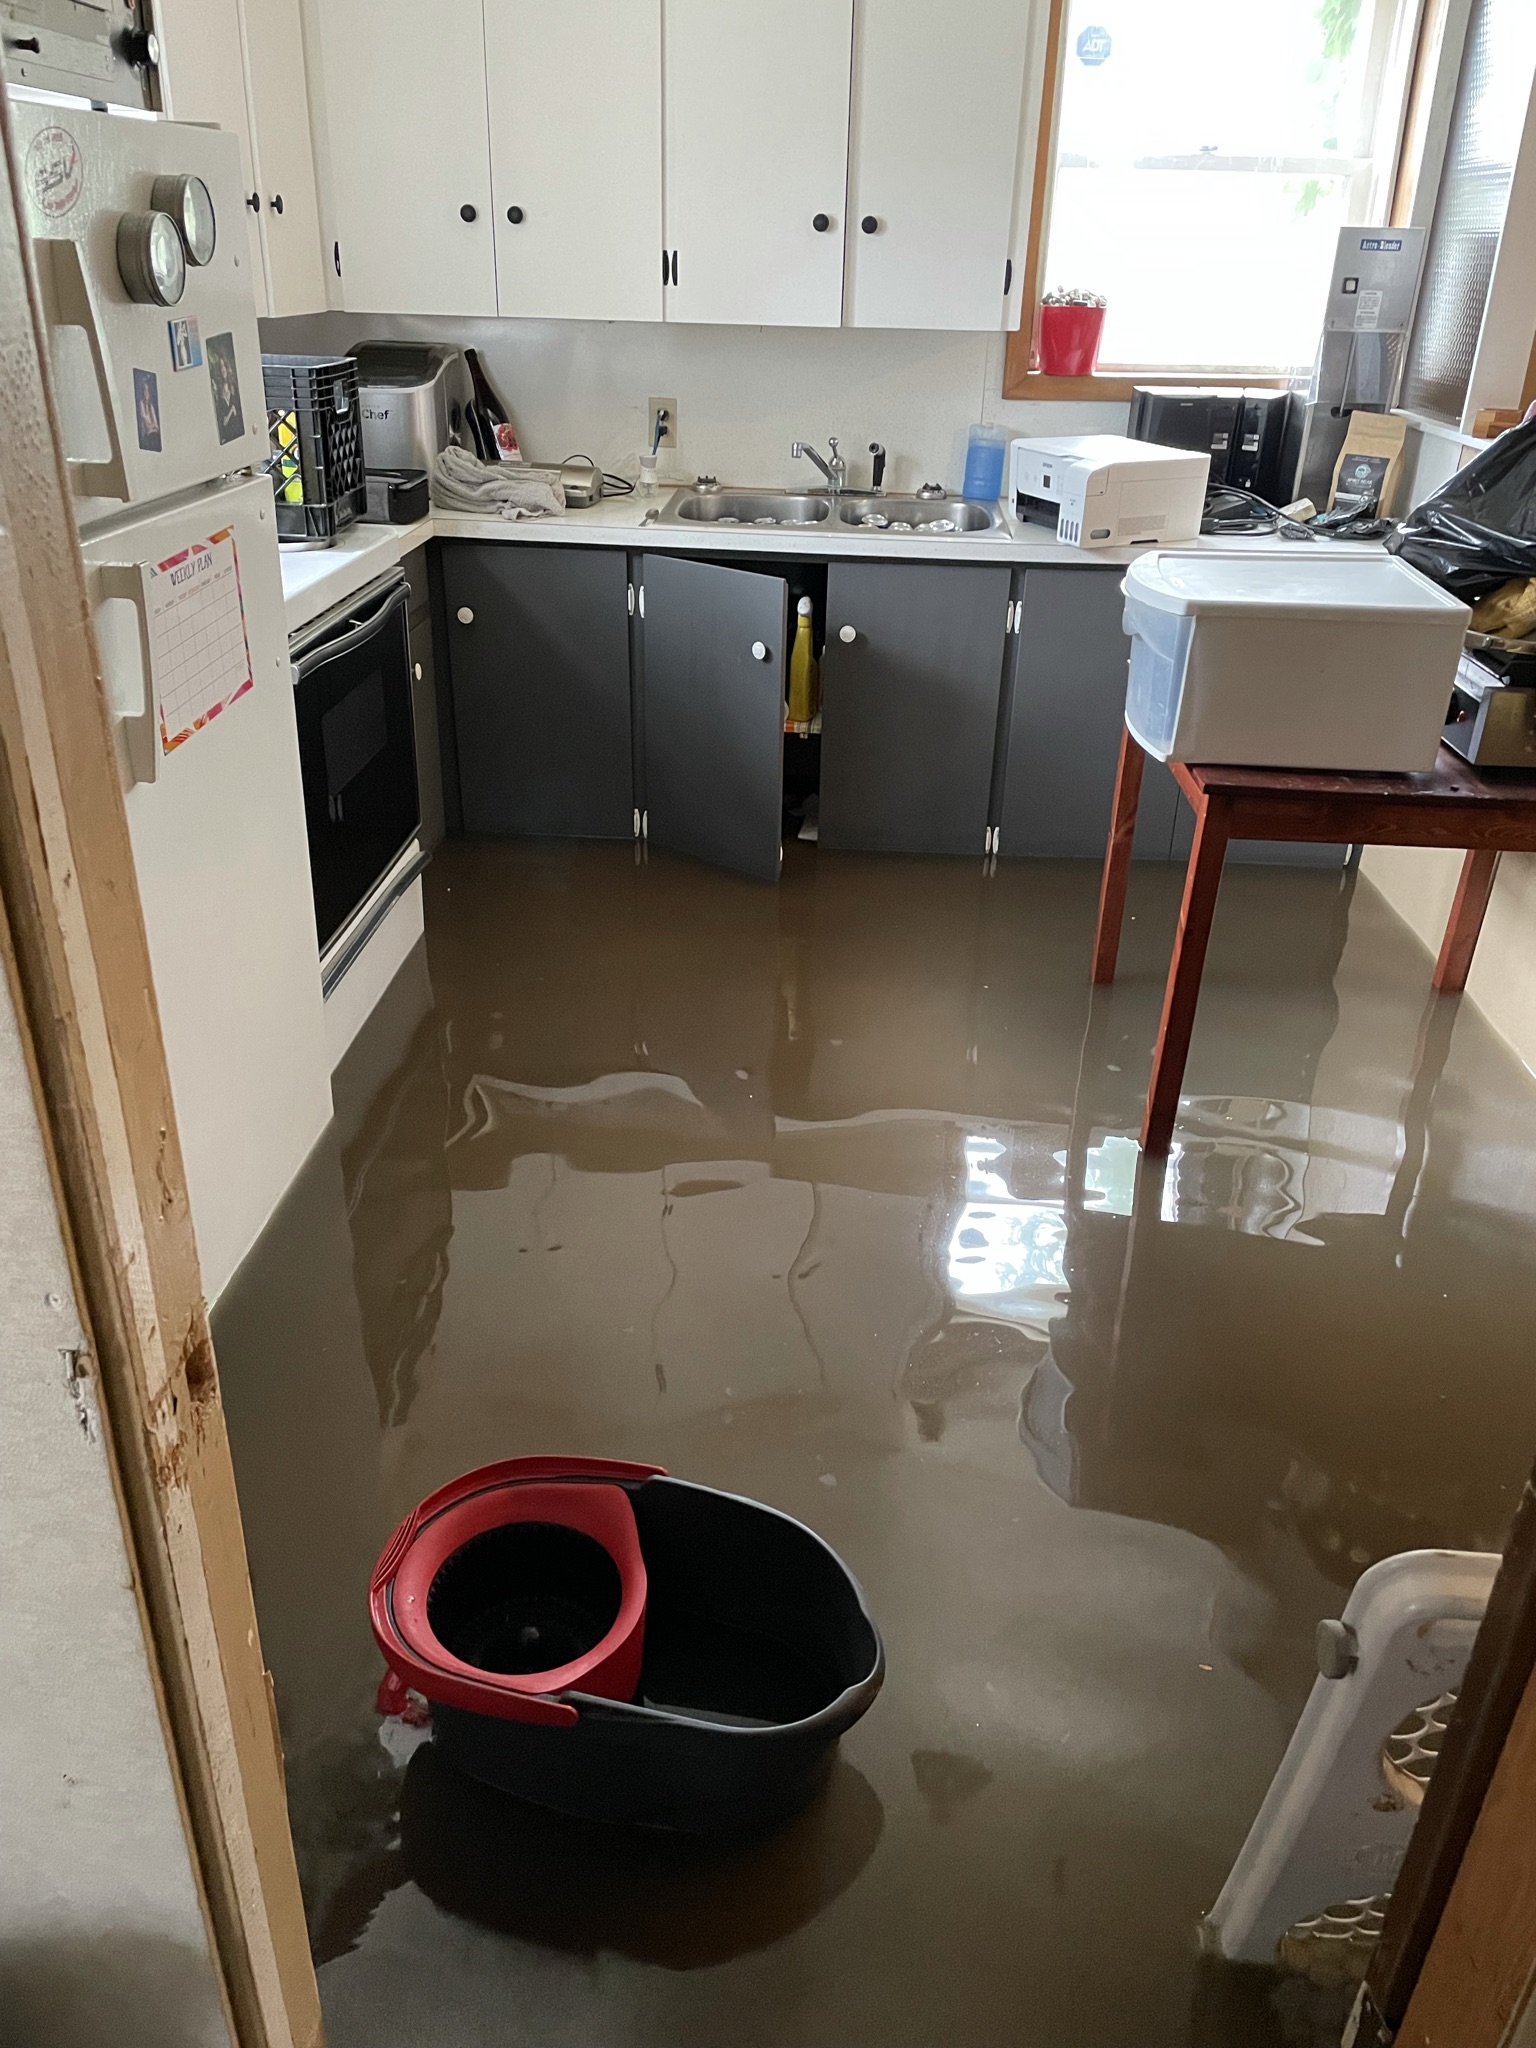 Flooded kitchen with standing water on floor reflecting cabinets, indicating a need for Water Damage Restoration in Canada Wide Restoration.com services